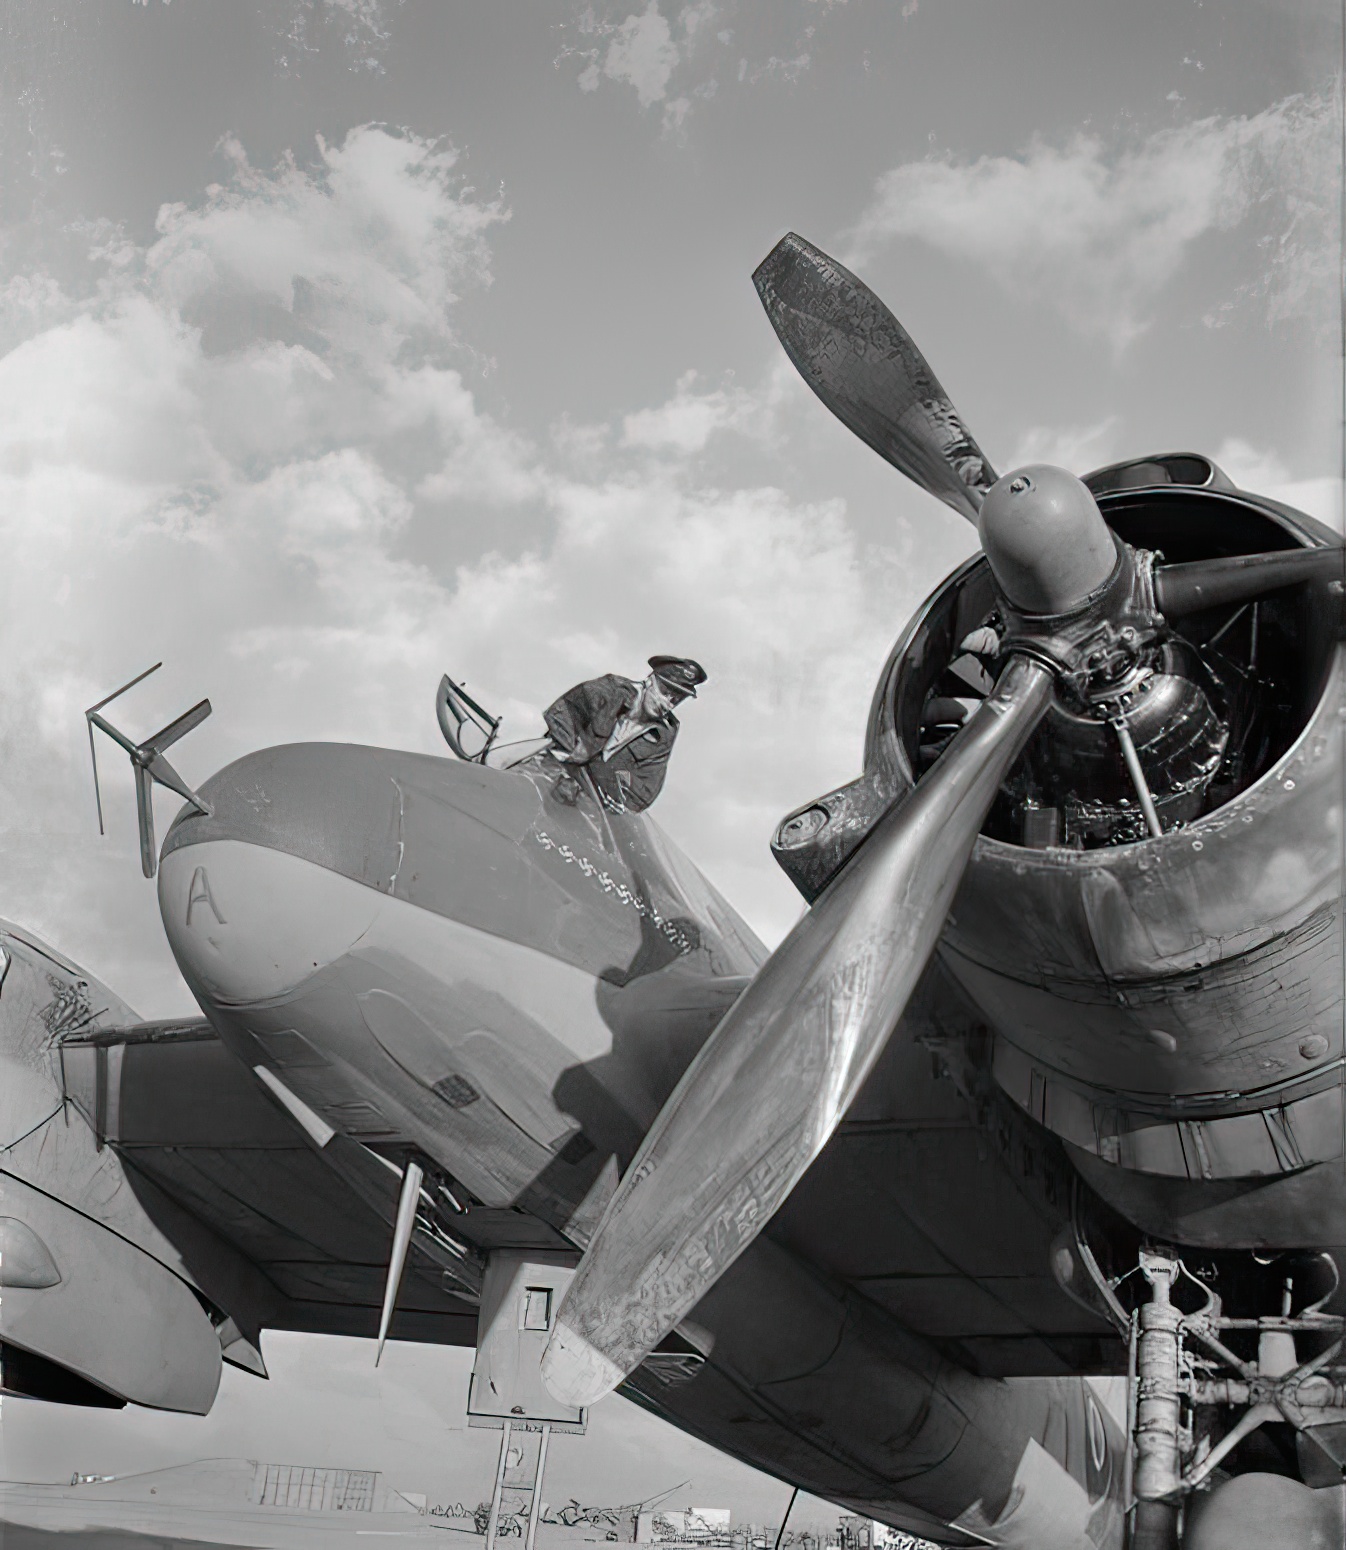 Bristol Beaufighter Mark VIF, V8762 'A'. The aircraft is equipped with AI Mark IV radar